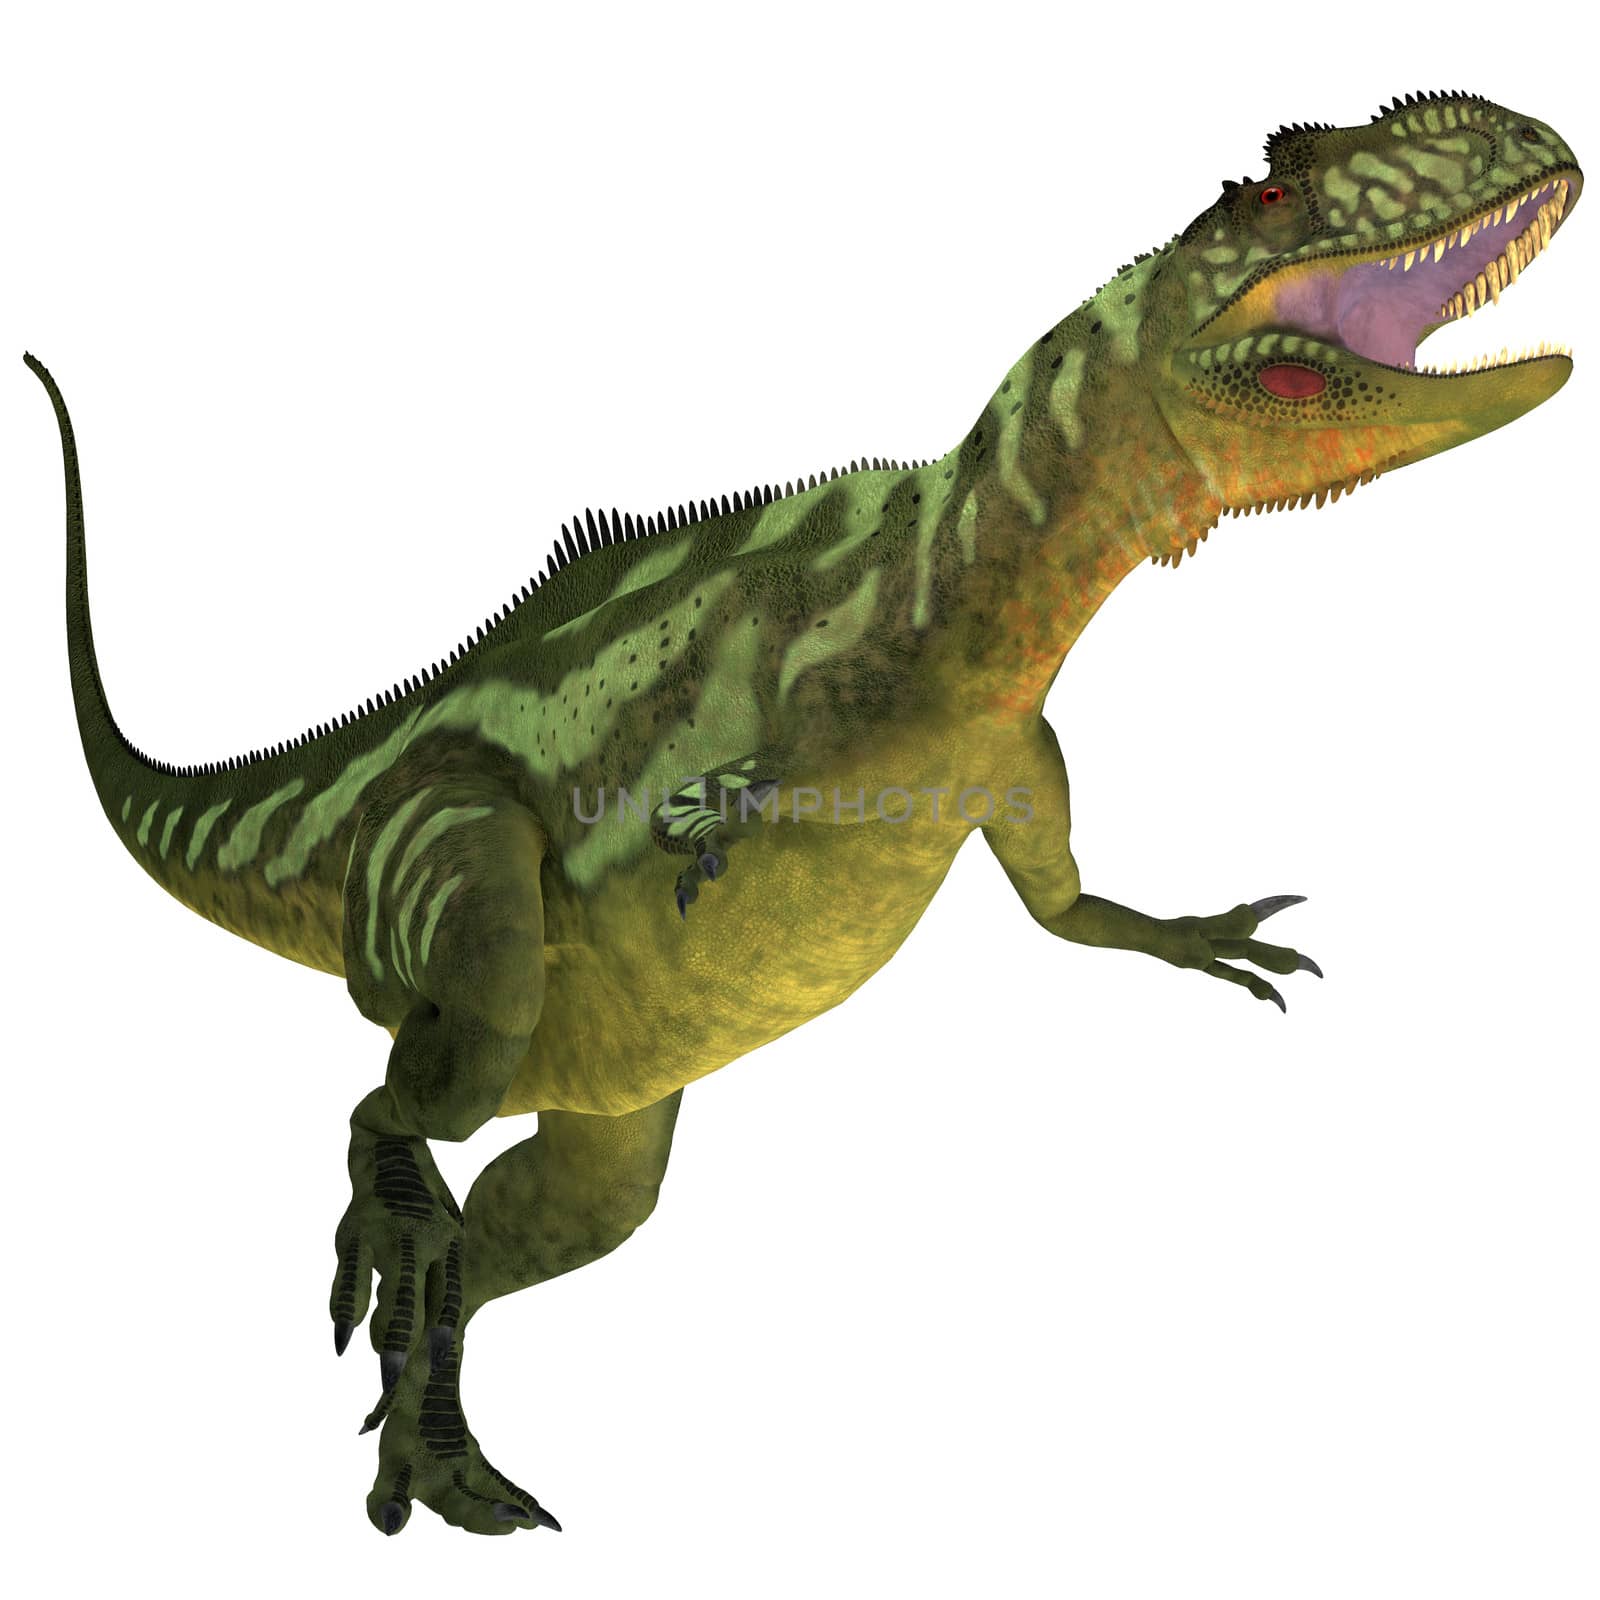 Yangchuanosaurus was a theropod dinosaur that lived in China during the Late Jurassic Era.